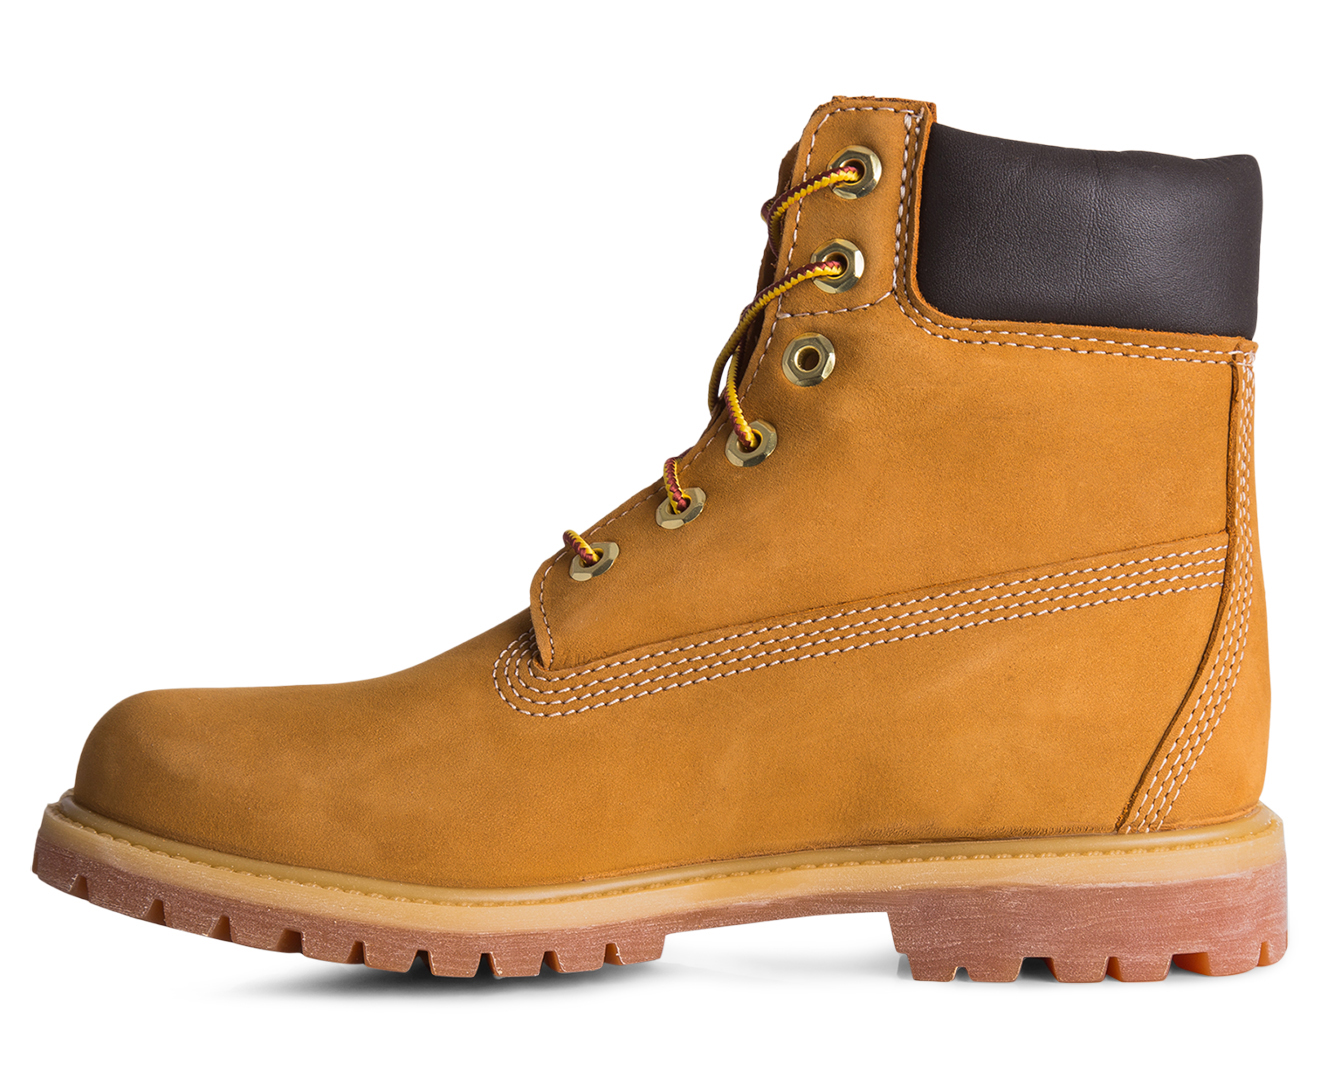 6 inch wheat timbs